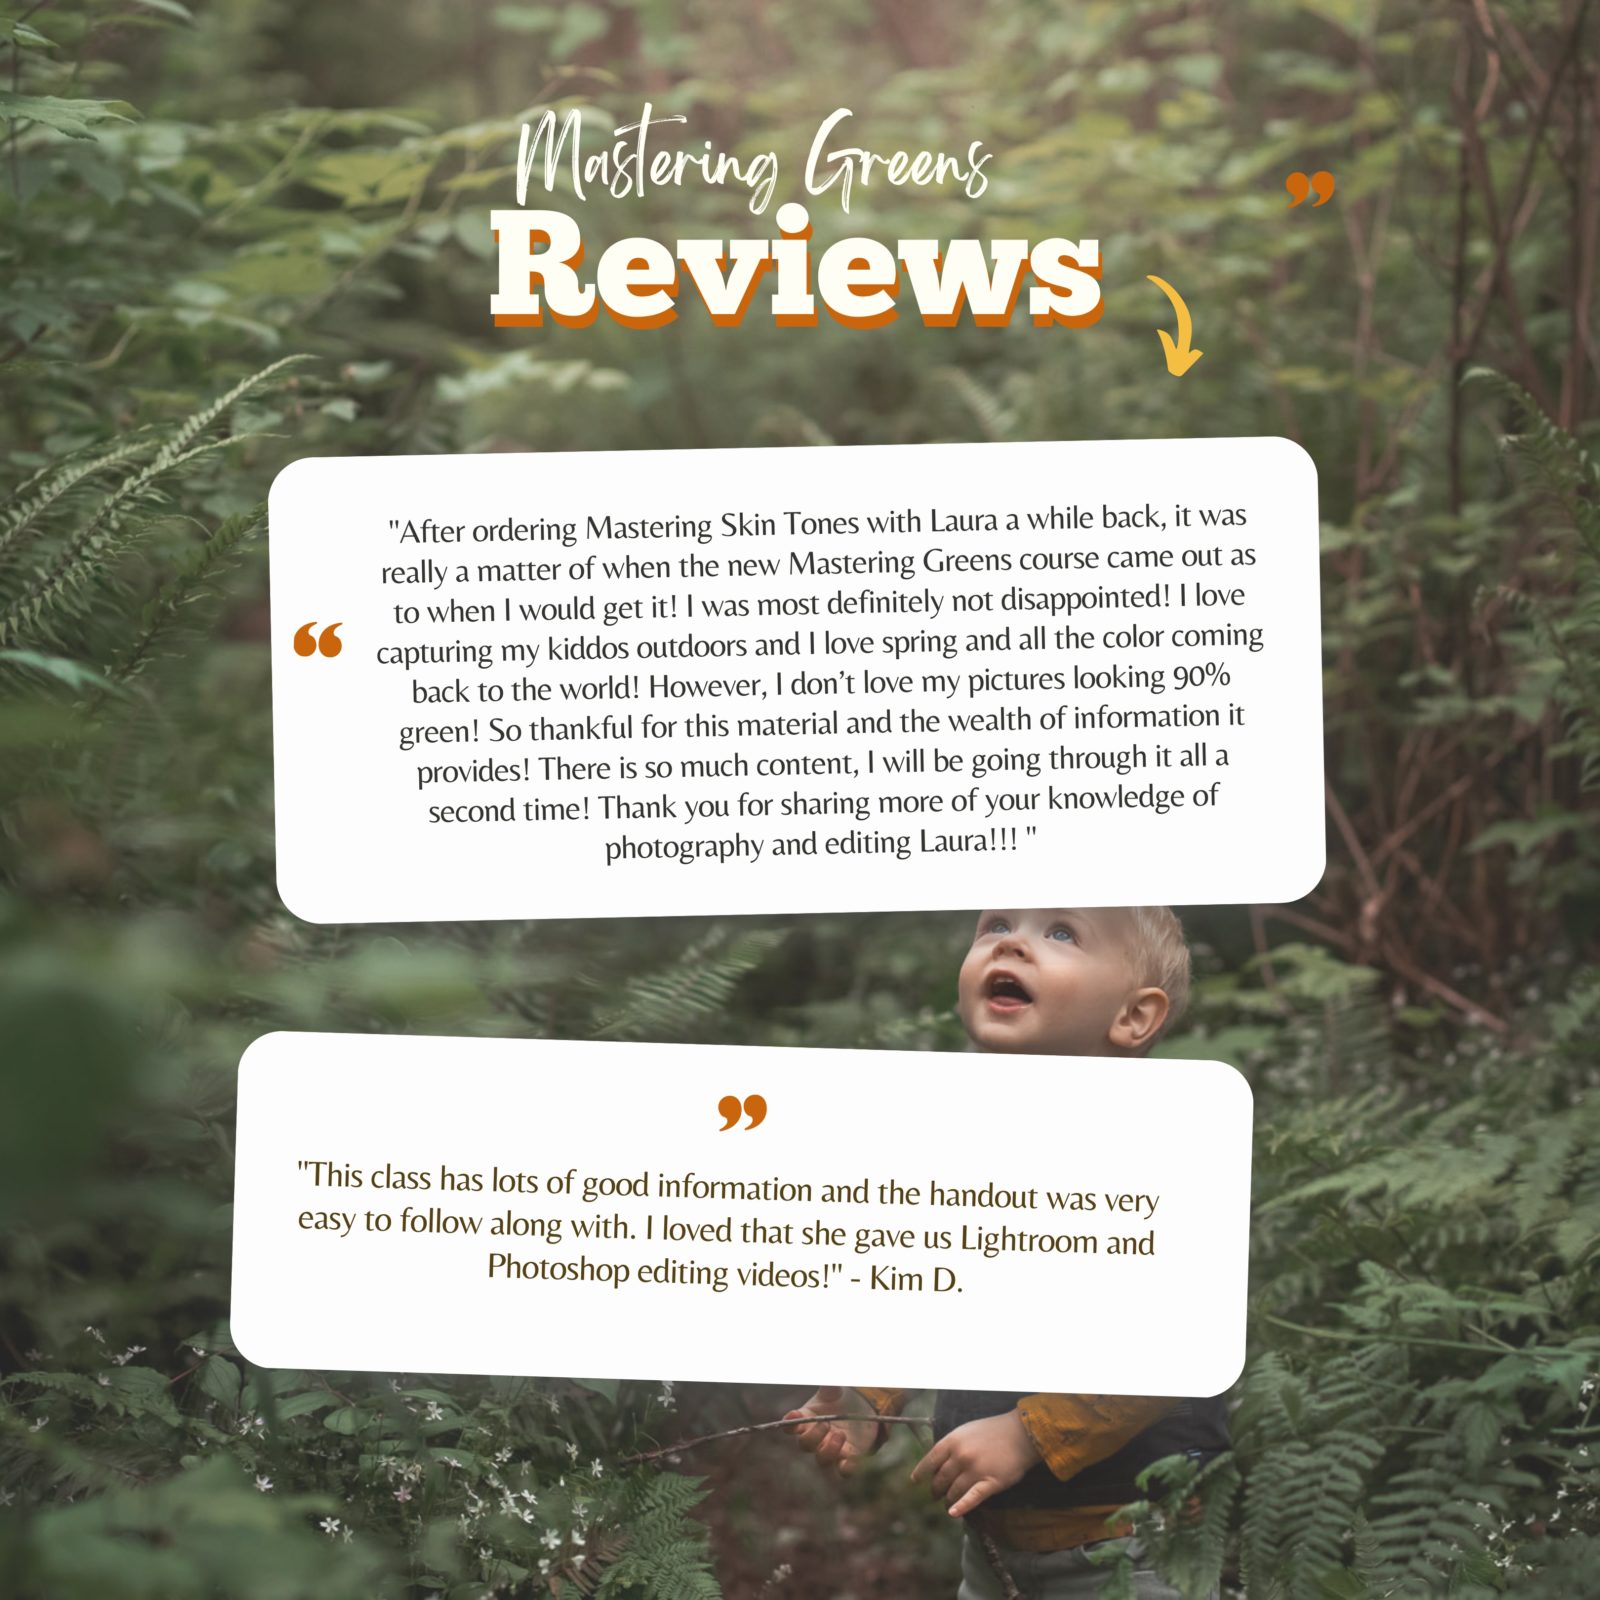 Reviews for Mastering Greens